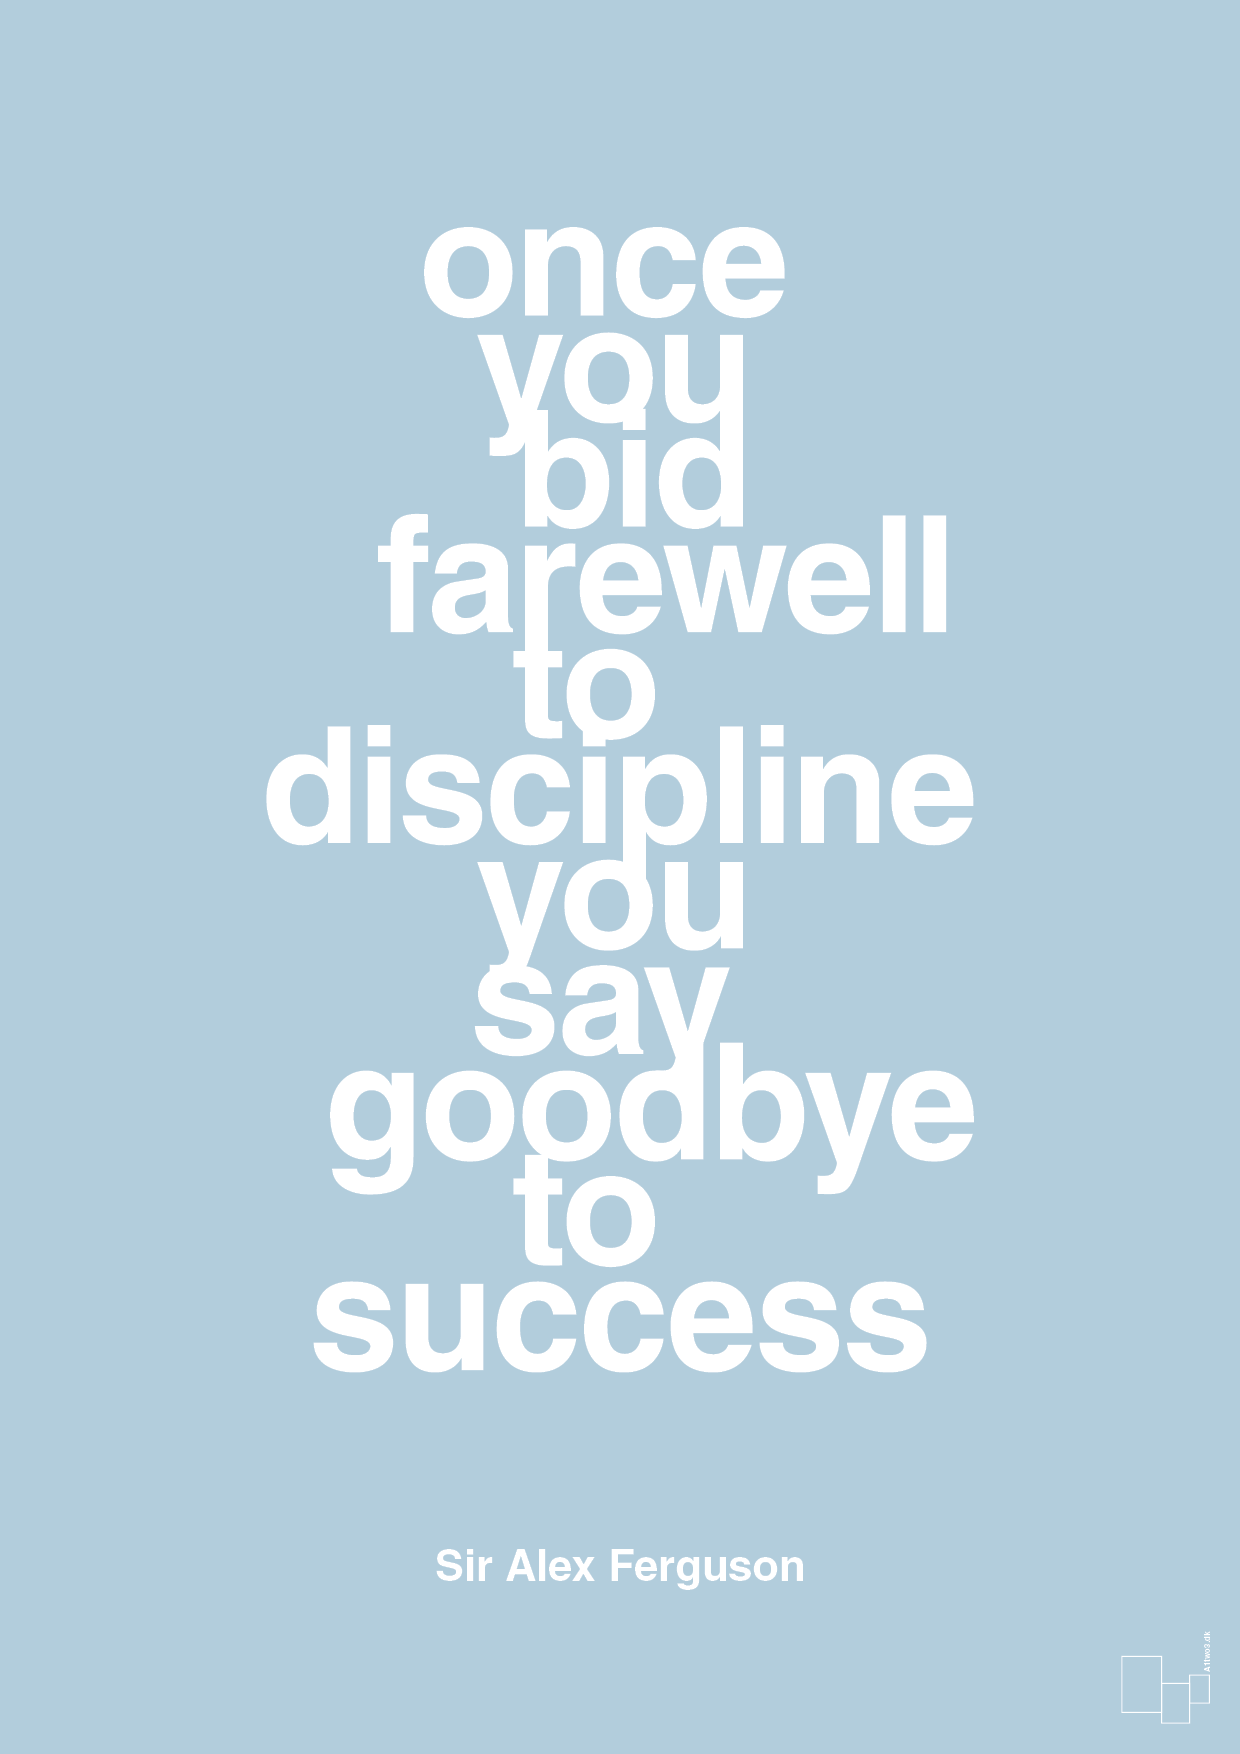 once you bid farewell to discipline you say goodbye to success - Plakat med Citater i Heavenly Blue